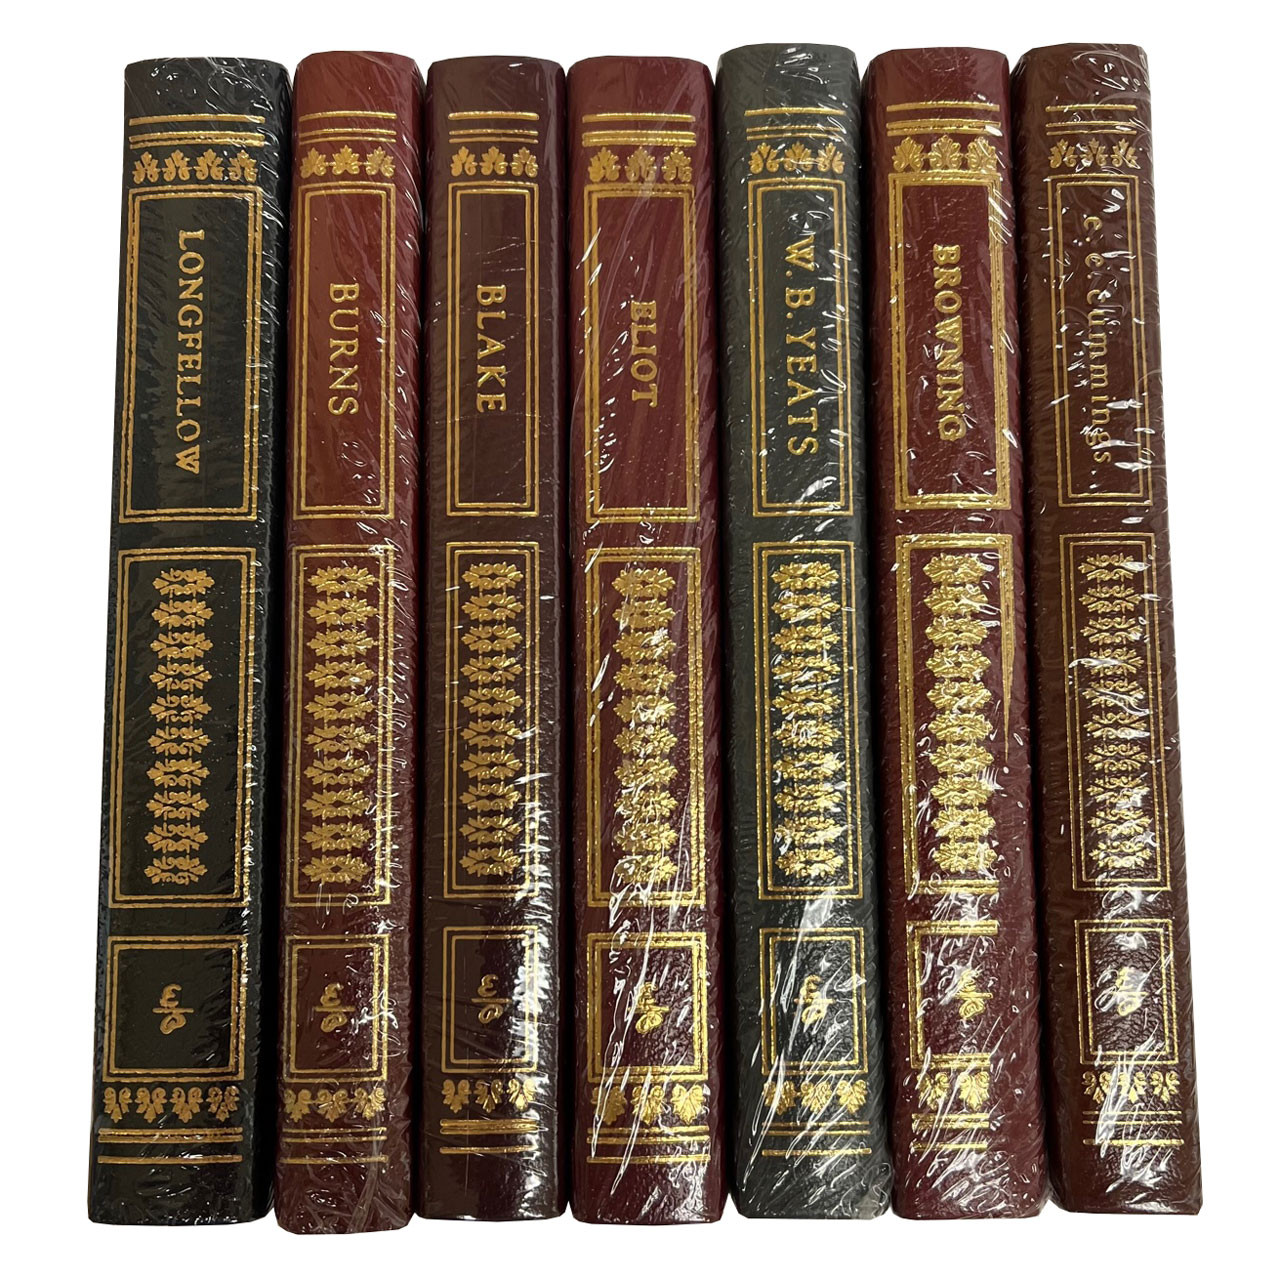 Easton Press "The Library of Great Poetry" Limited Collector's Edition, Leather Bound Complete Matching Set, 25 Vol's [Sealed]